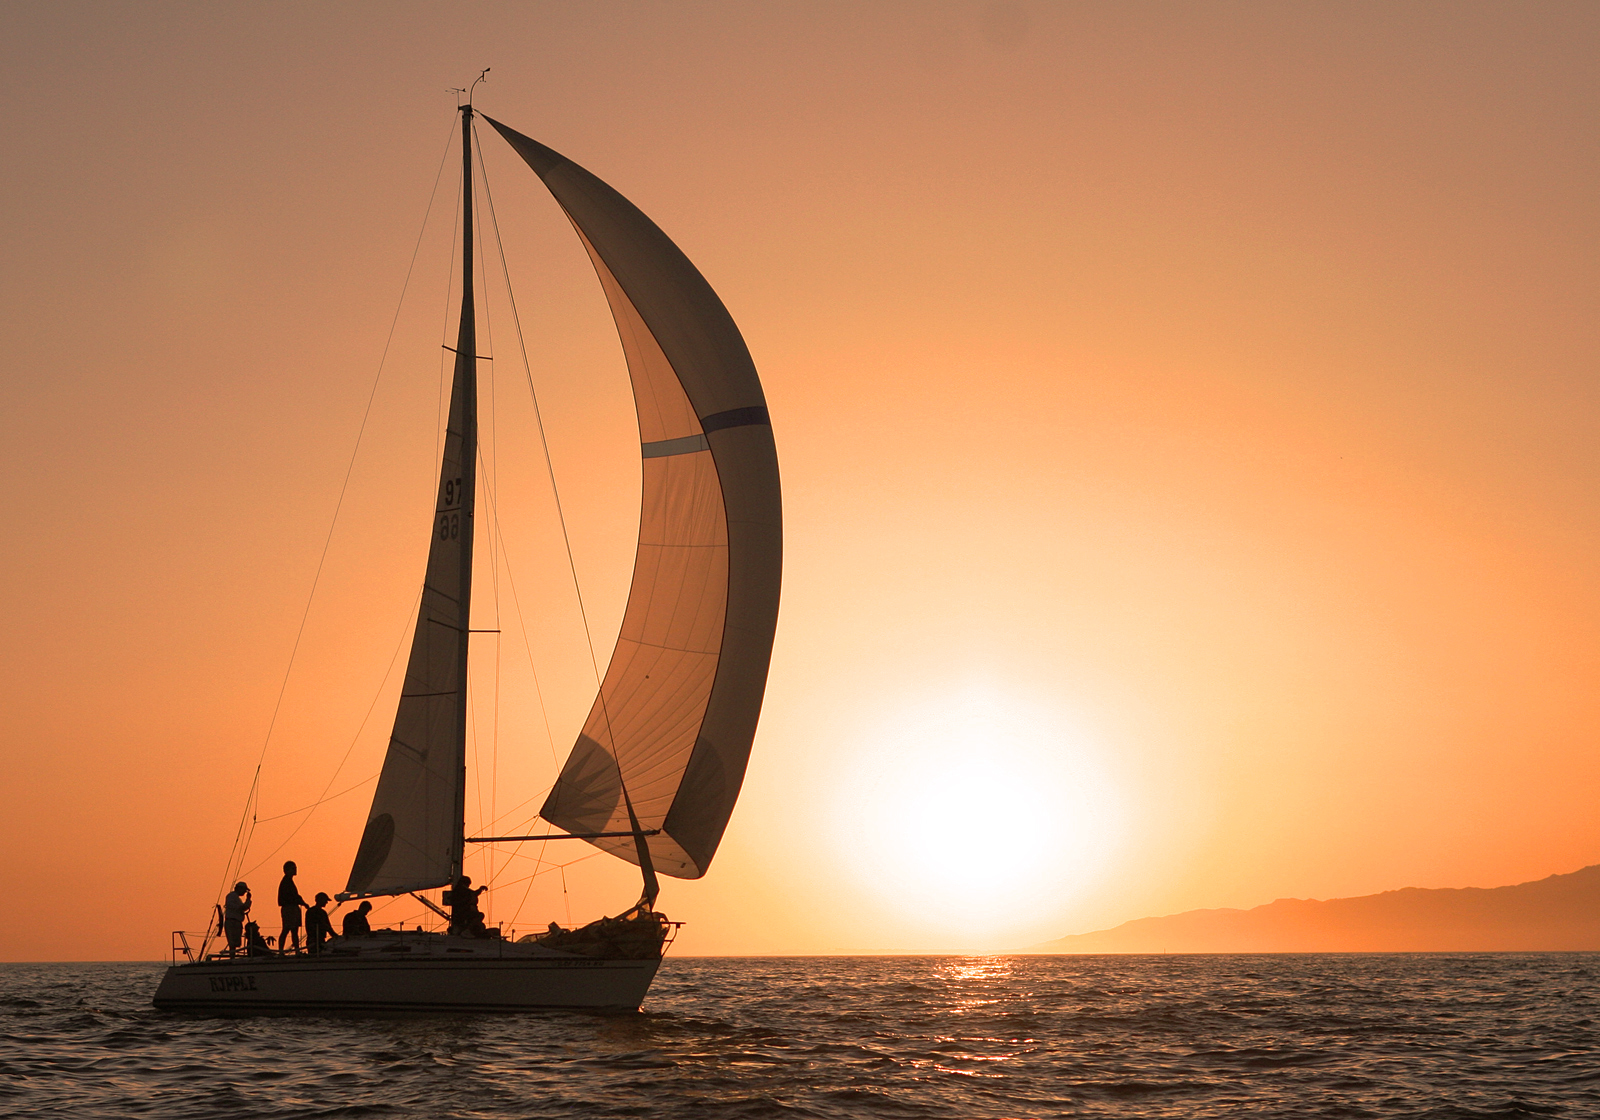 The public can charter sailboats - with or without a skipper - for a leisure cruise up the Los Angeles coast.